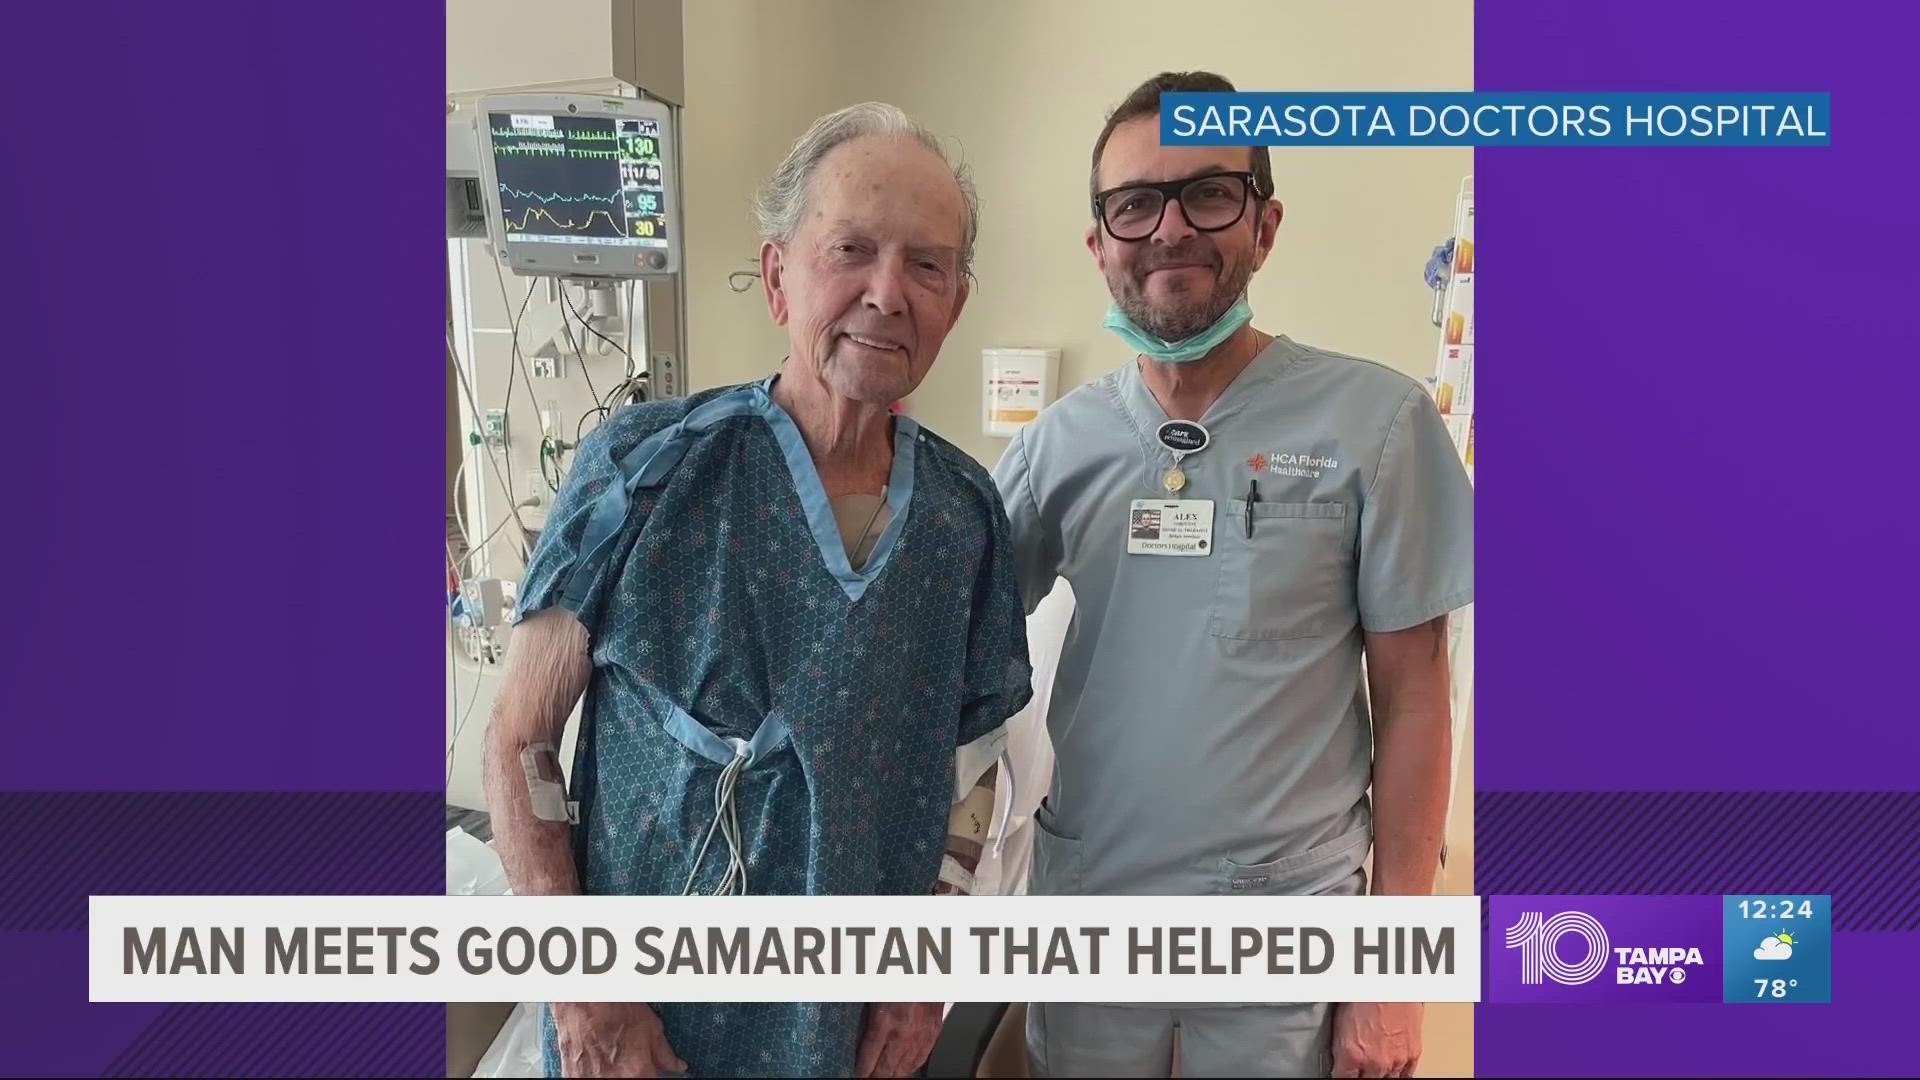 It wasn't until the day after when the good Samaritan was doing assessments on patients in the emergency room when he walked into the man's room and recognized him.